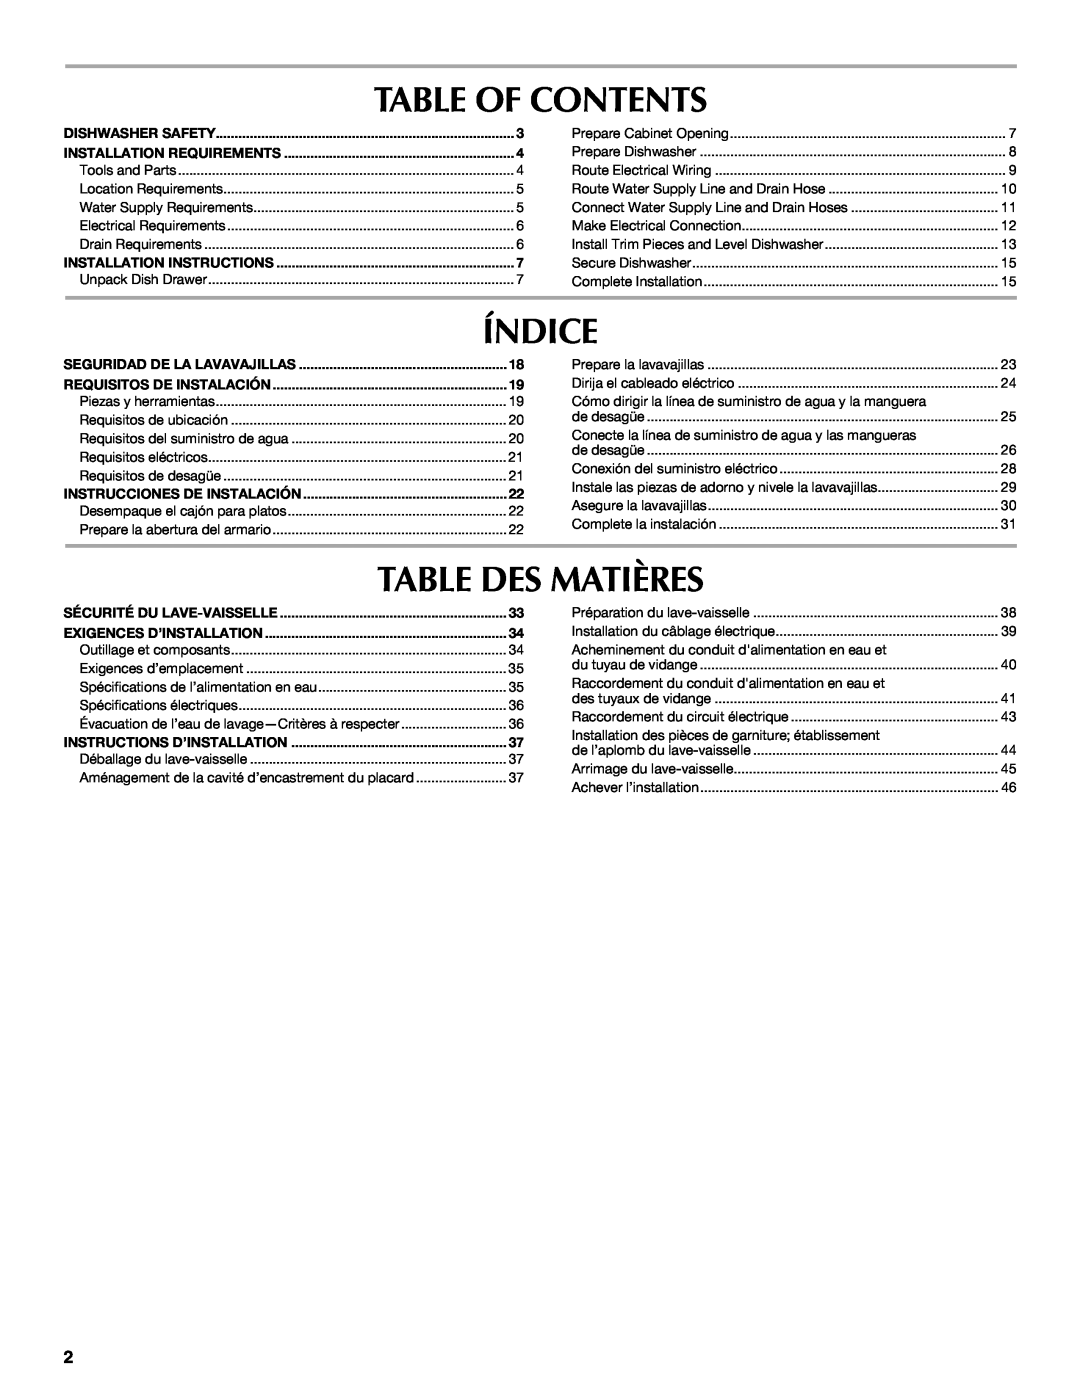 Maytag W10300218B installation instructions Table Of Contents, Índice, Table Des Matières 